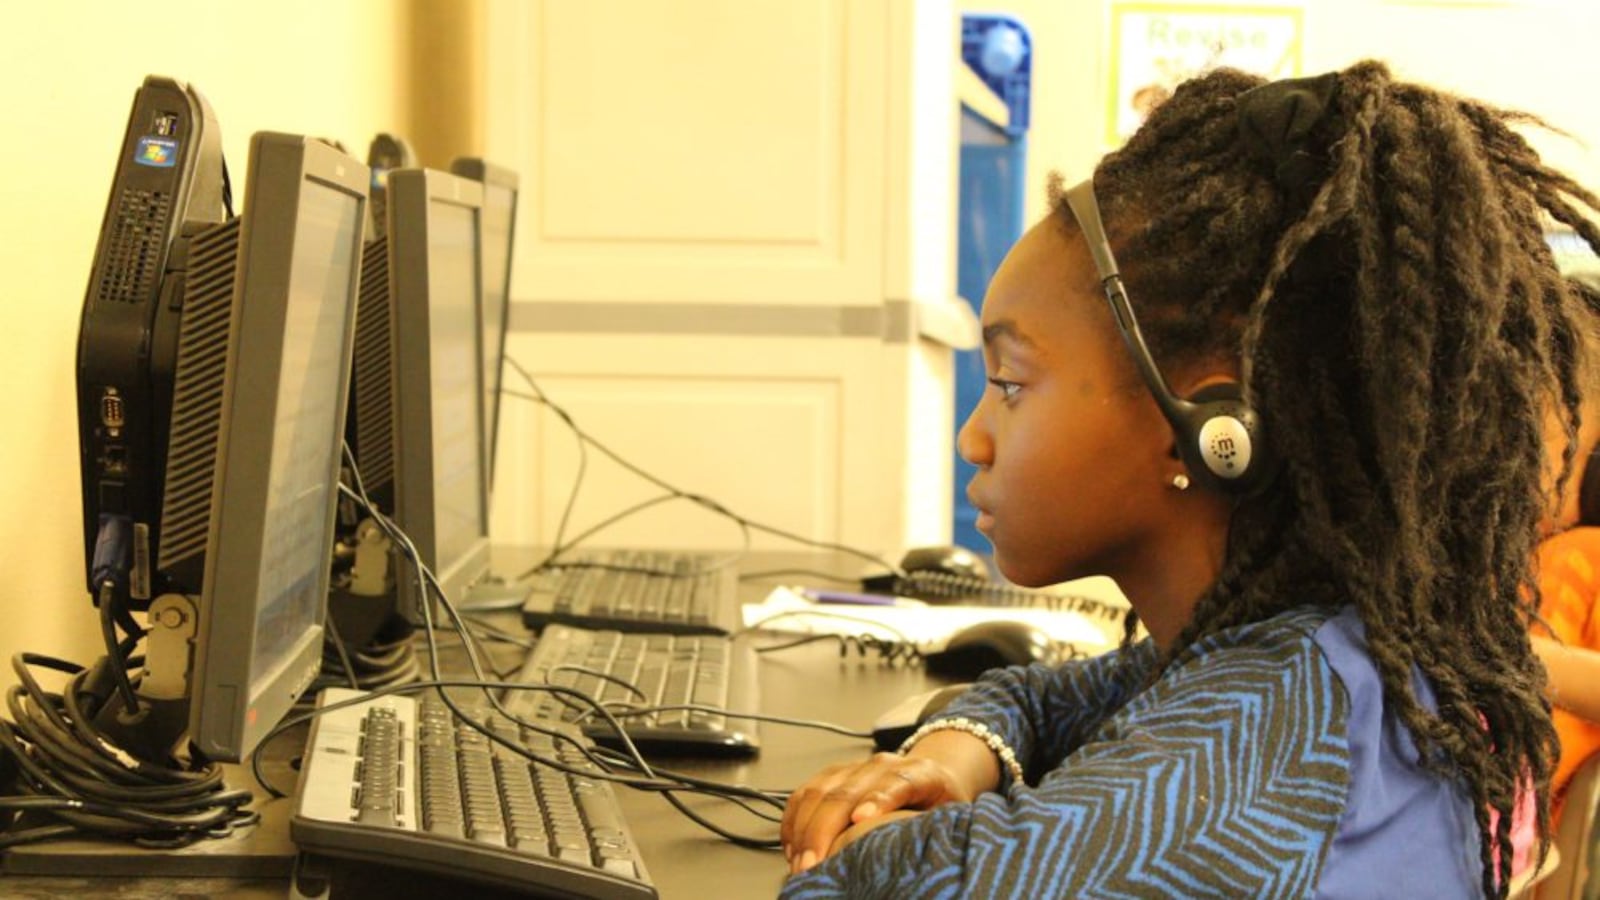 A HOPE Online student works during the day at an Aurora learning center. (Photo by Nicholas Garcia, Chalkbeat)